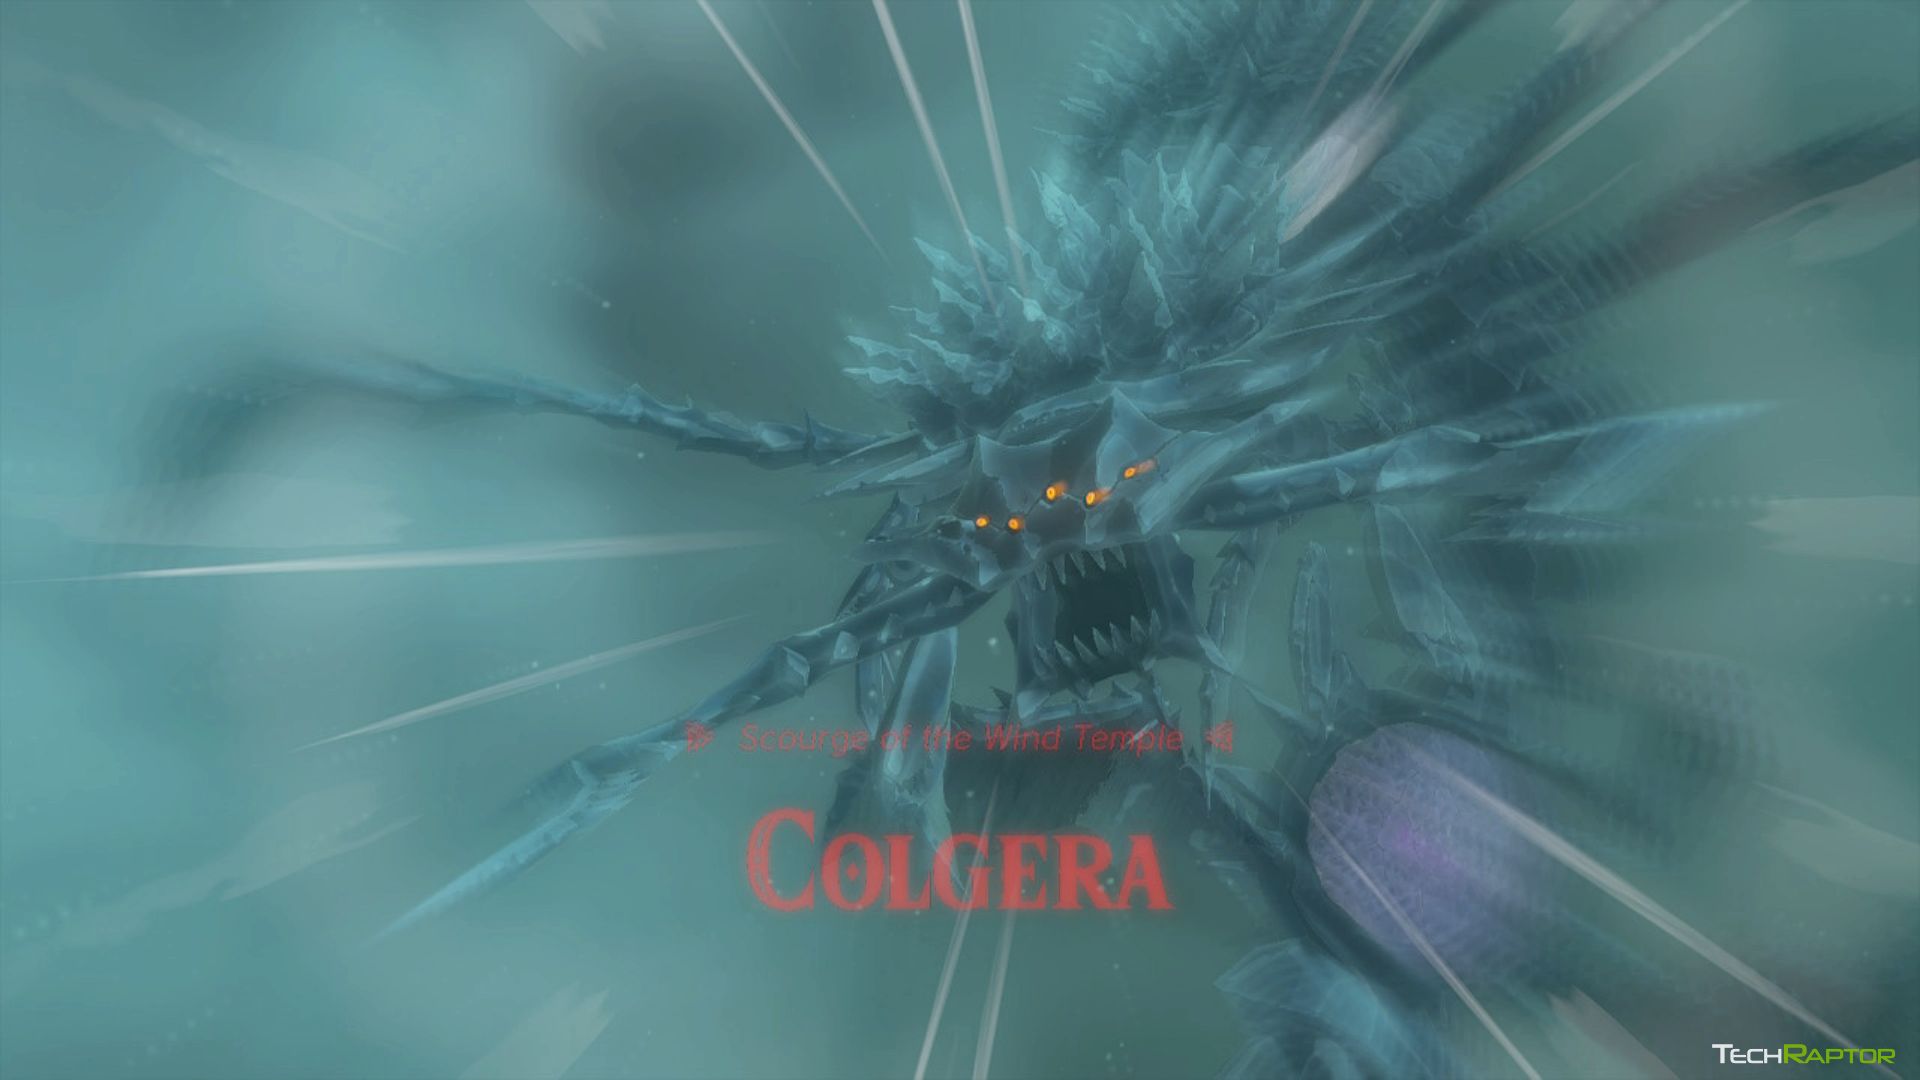 The Colgera introduces itself as a boss battle in Tears of the Kingdom